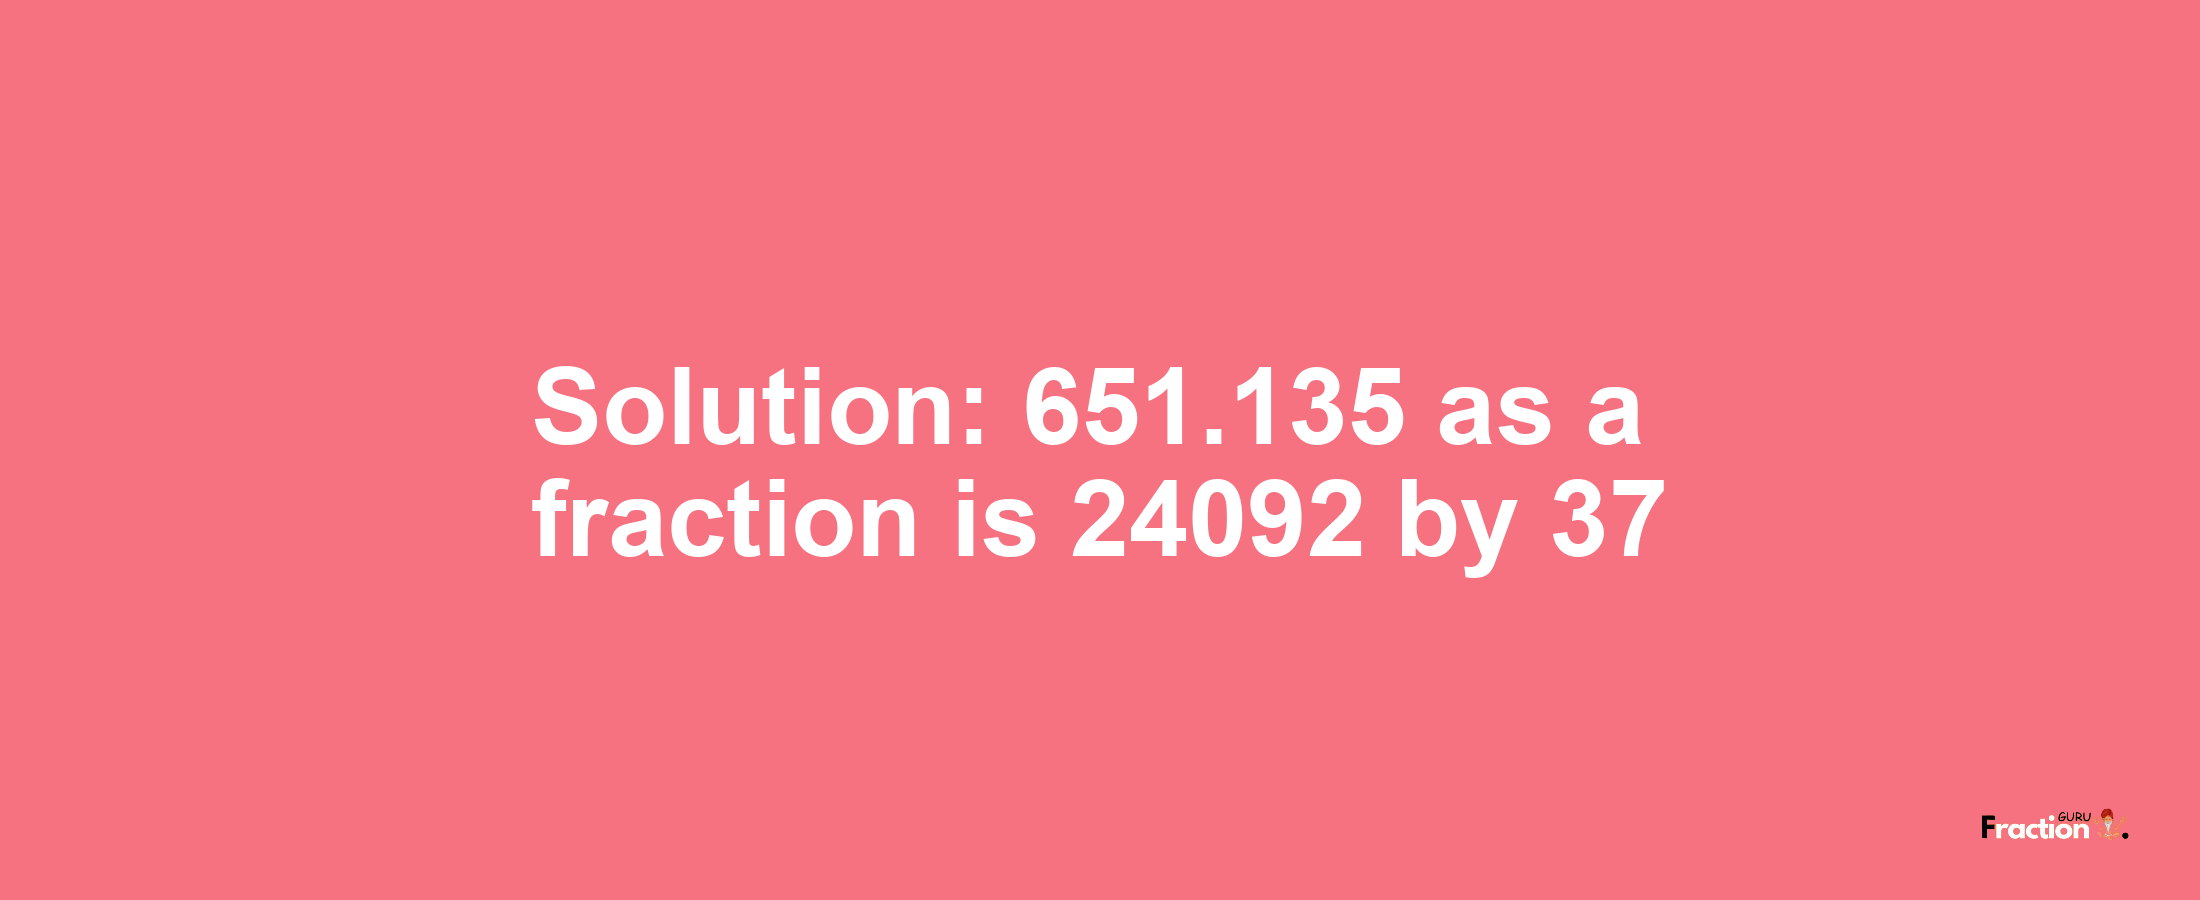 Solution:651.135 as a fraction is 24092/37